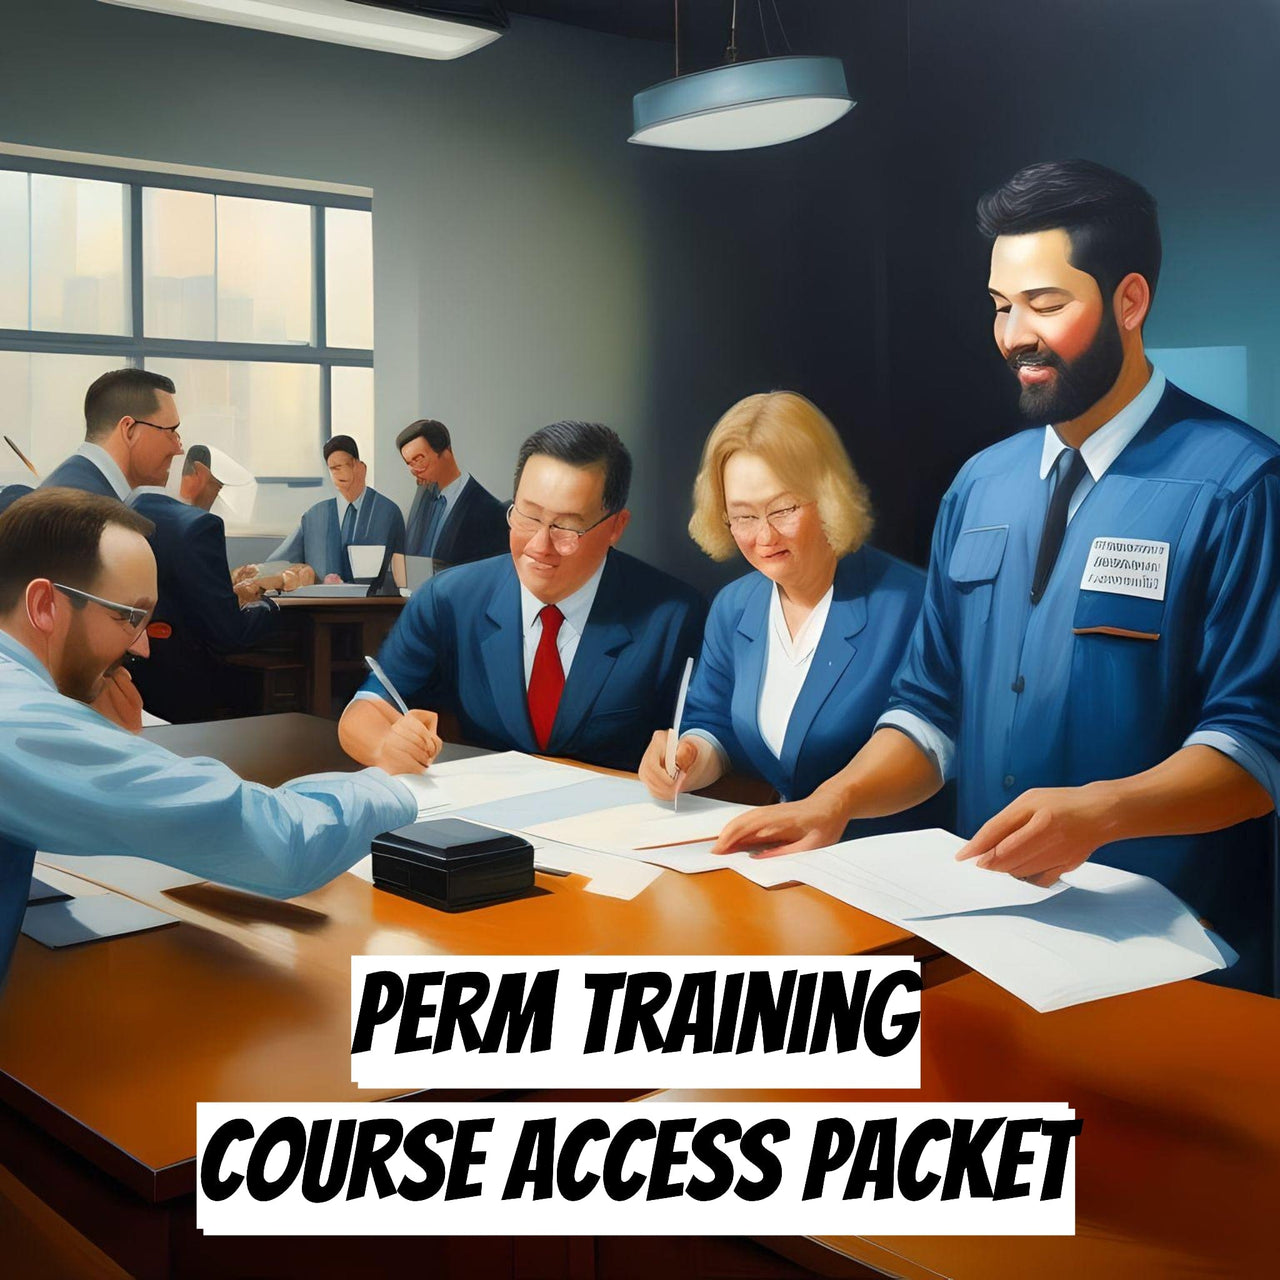 Rocket Immigration Petitions Immigration Visa PERM Training Course Access Packet